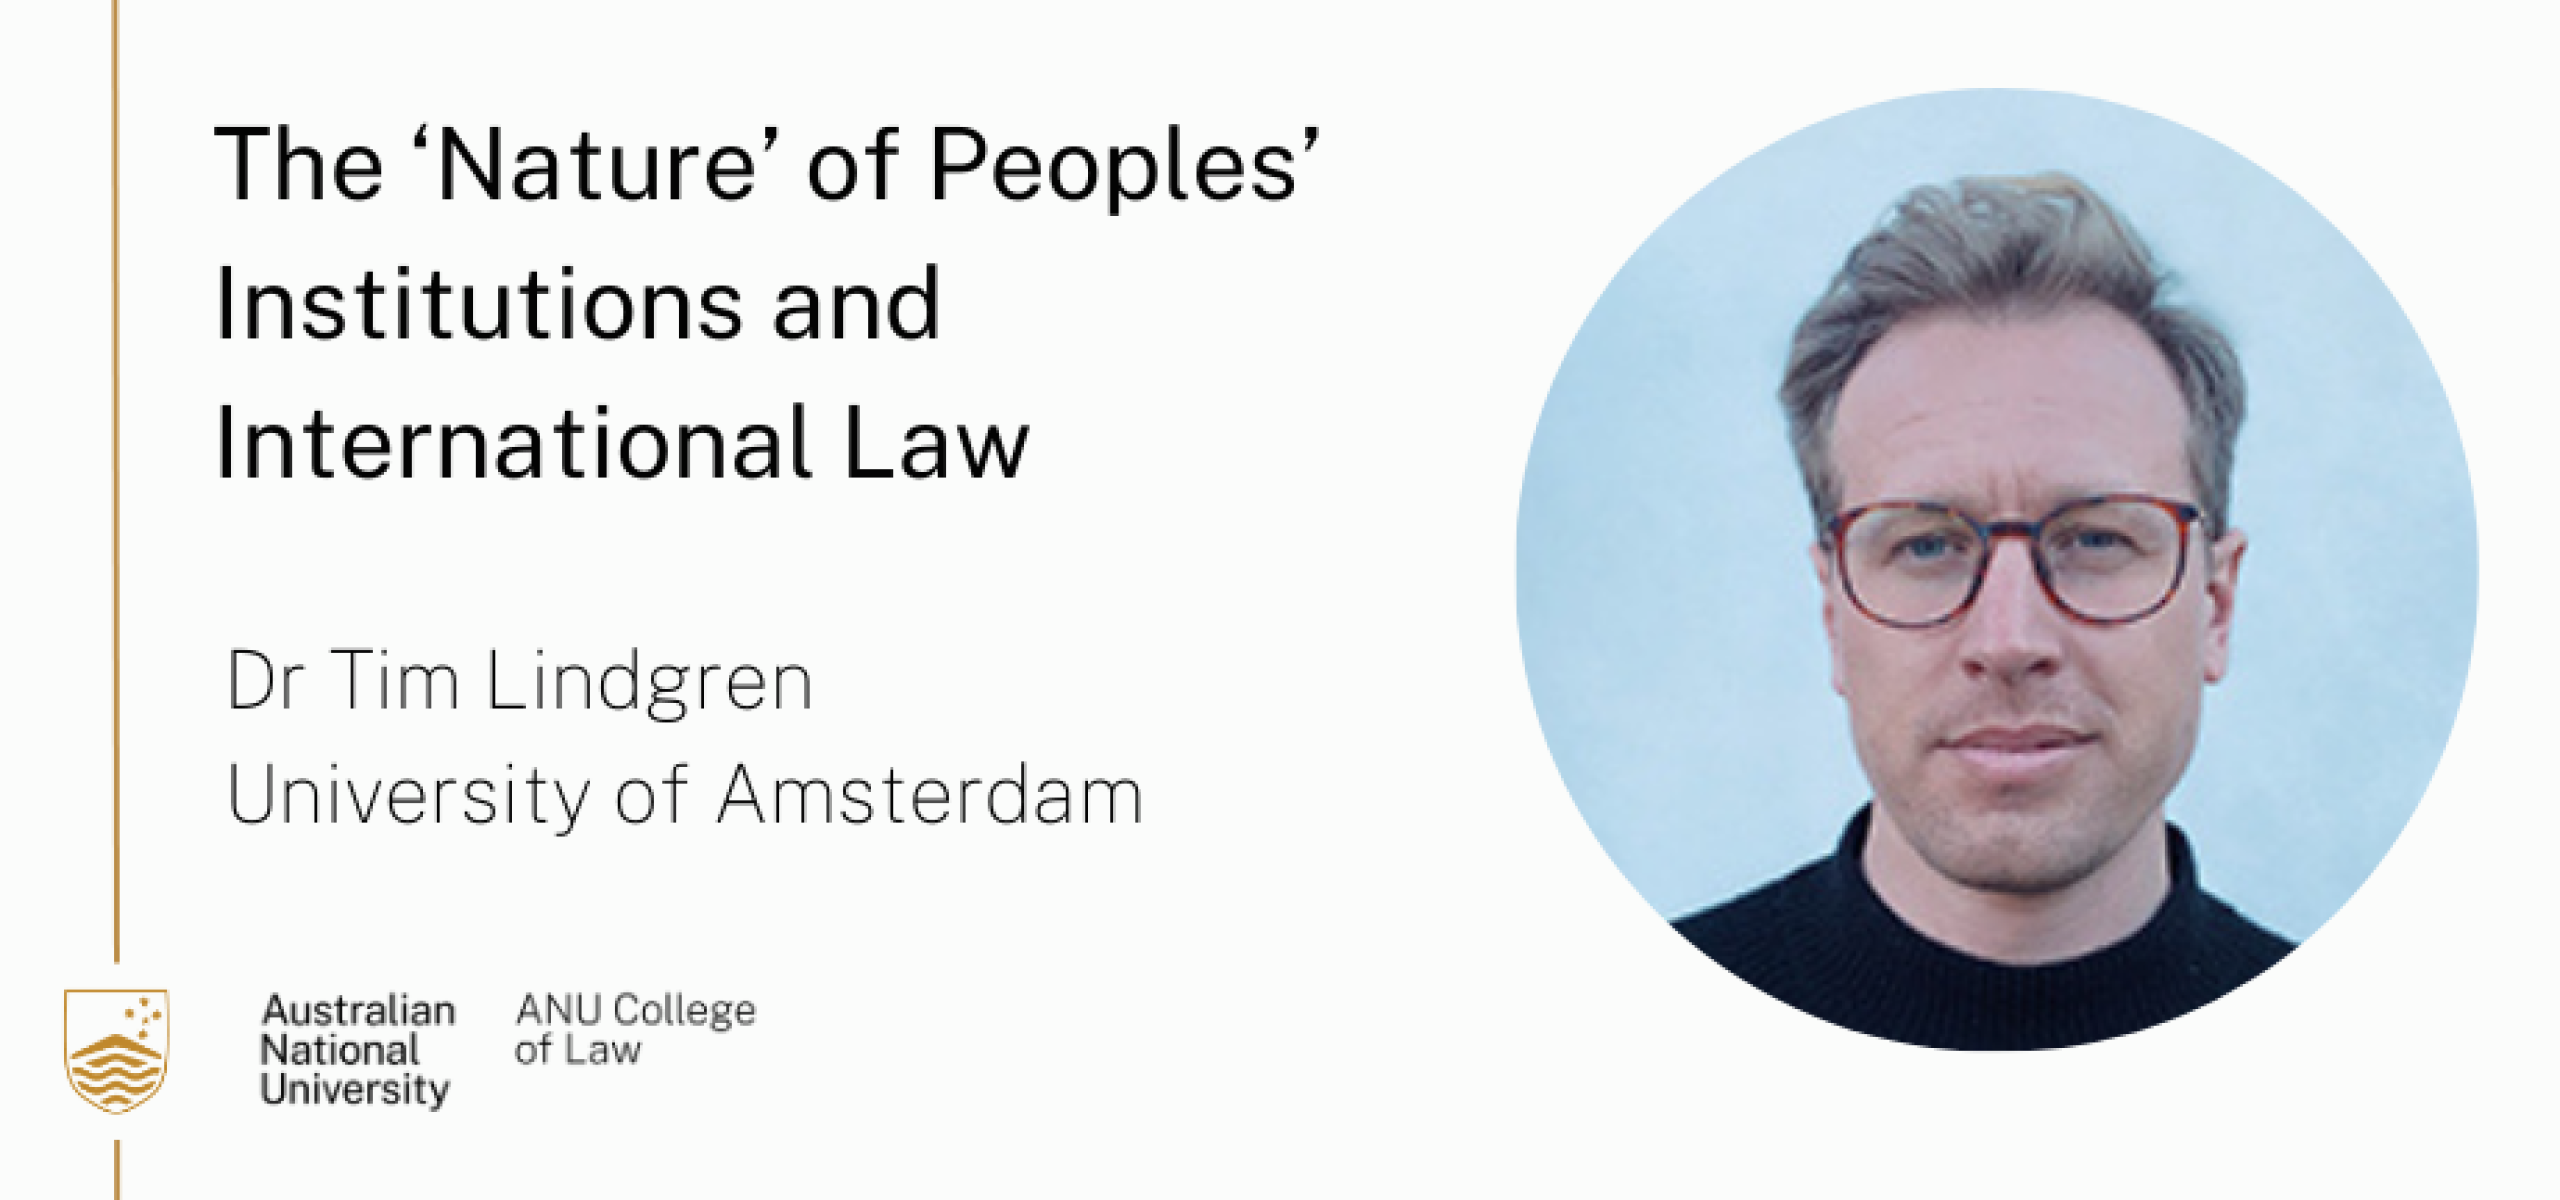 The ‘Nature’ of Peoples’ Institutions and International Law